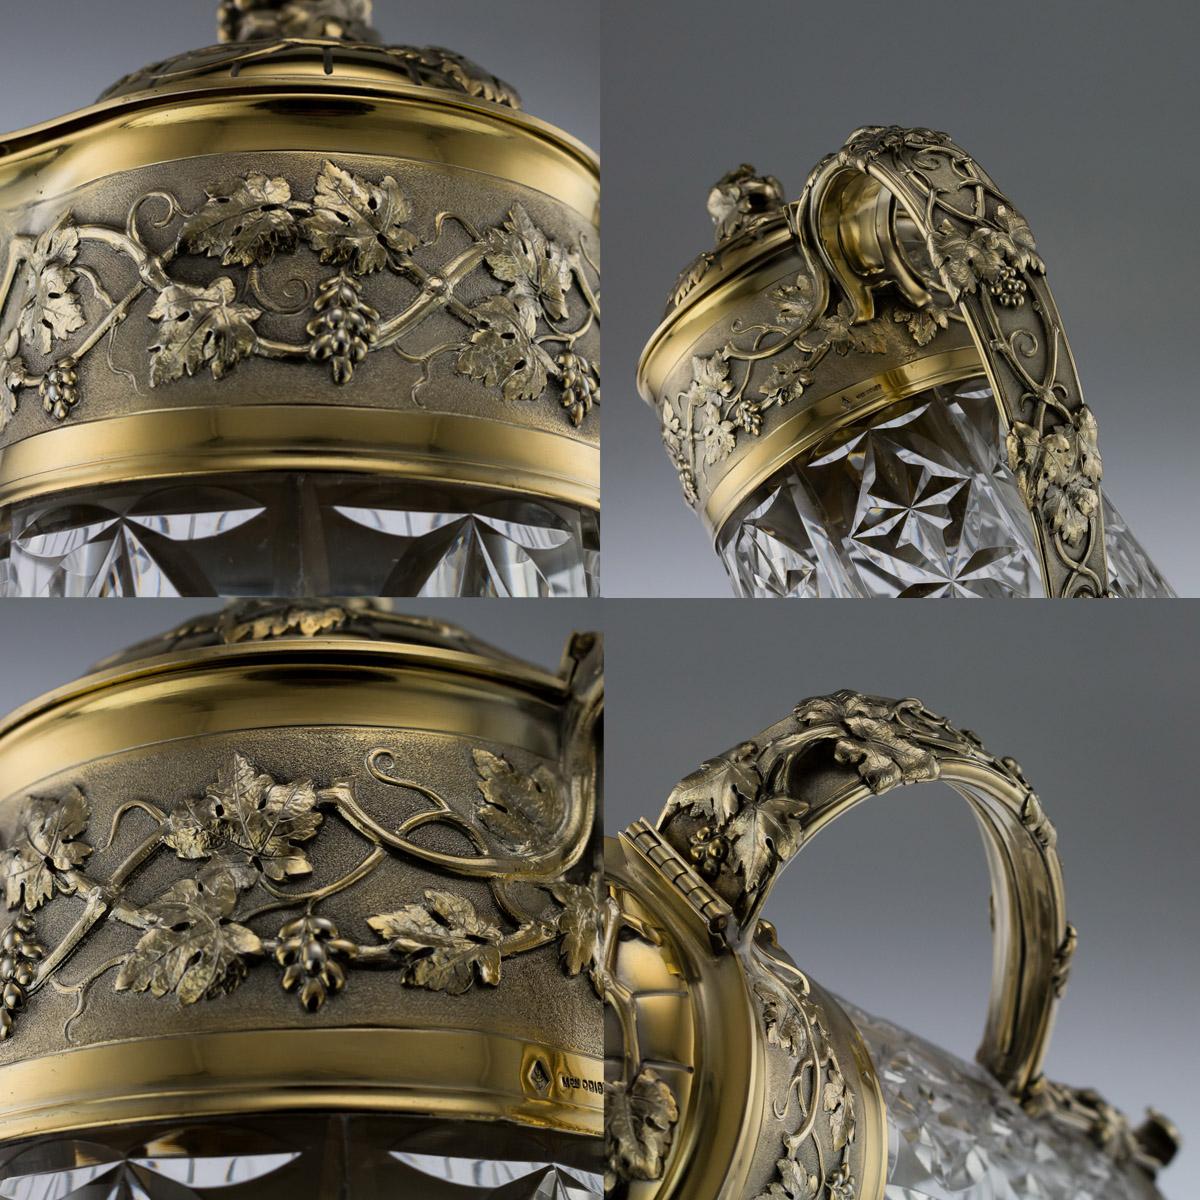 20th Century French Solid Silver-Gilt & Cut Glass Claret Jug, Odiot, circa 1910 3